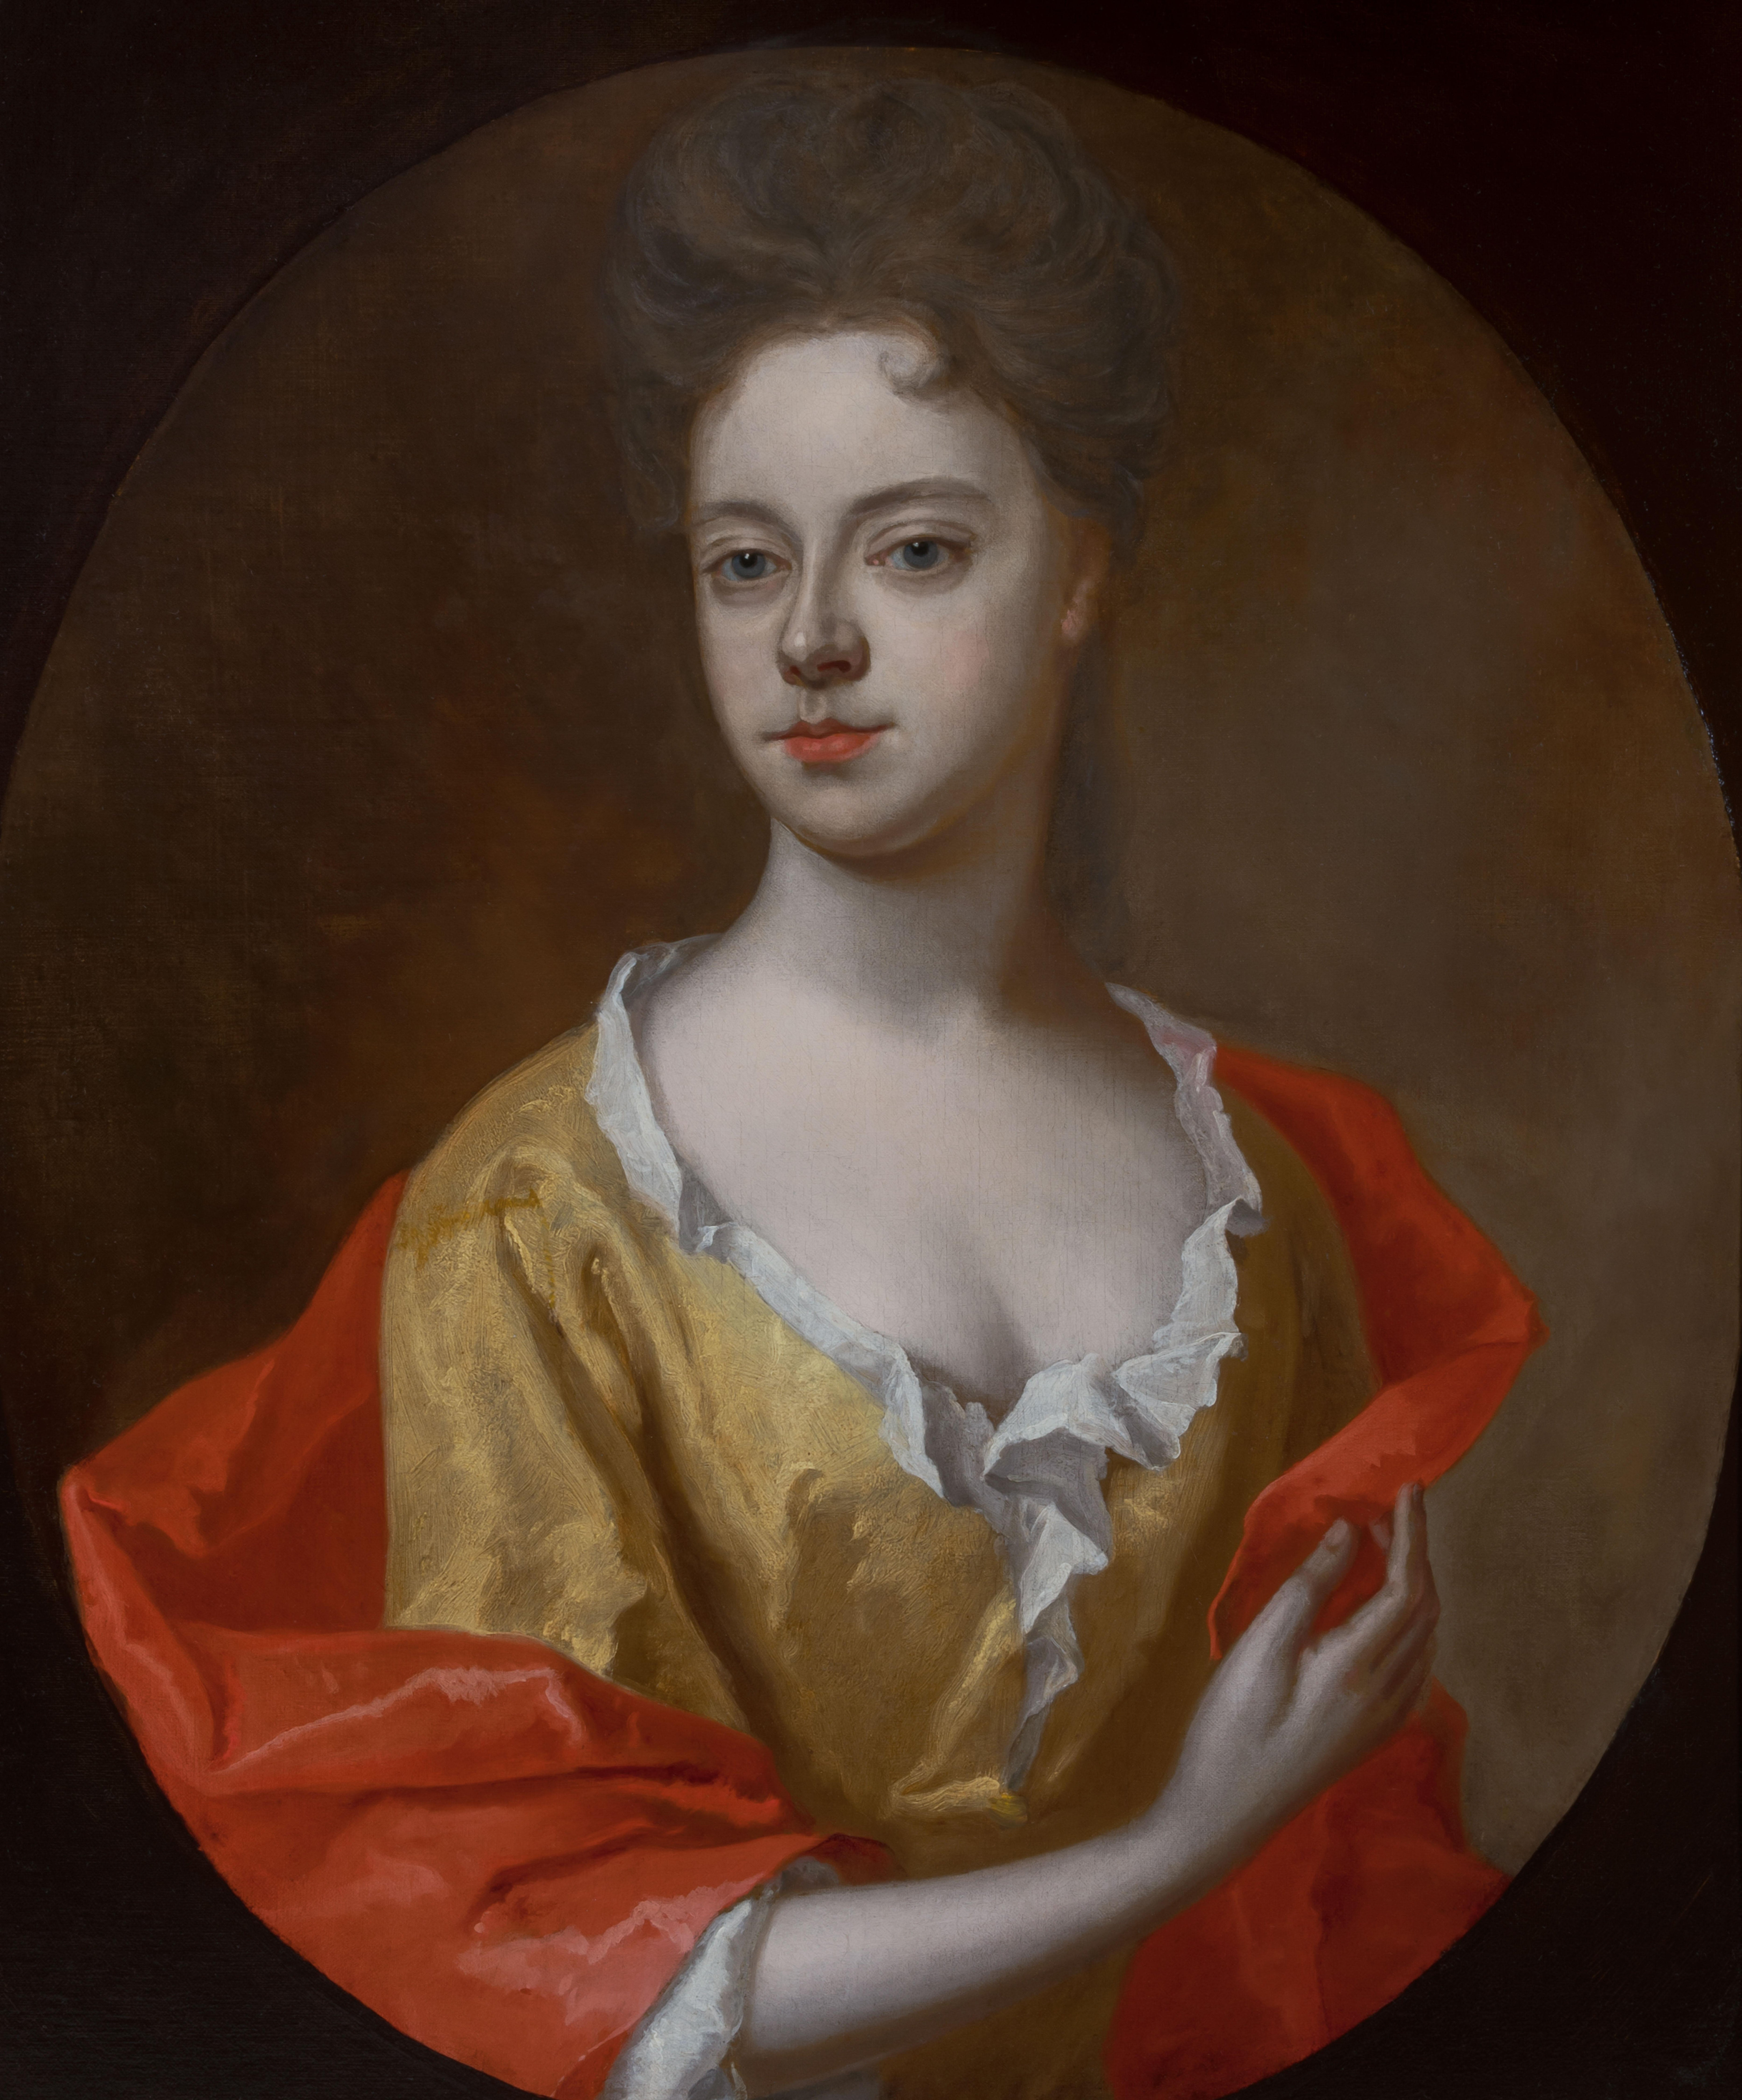 This portrait depicts an elegant, aristocratic women wearing a yellow silk dress with white chemise and a red mantle elegantly draped around her body.  By tradition the portrait represents Mary Capel, Countess of Essex.  Born Lady Mary Bentinck in